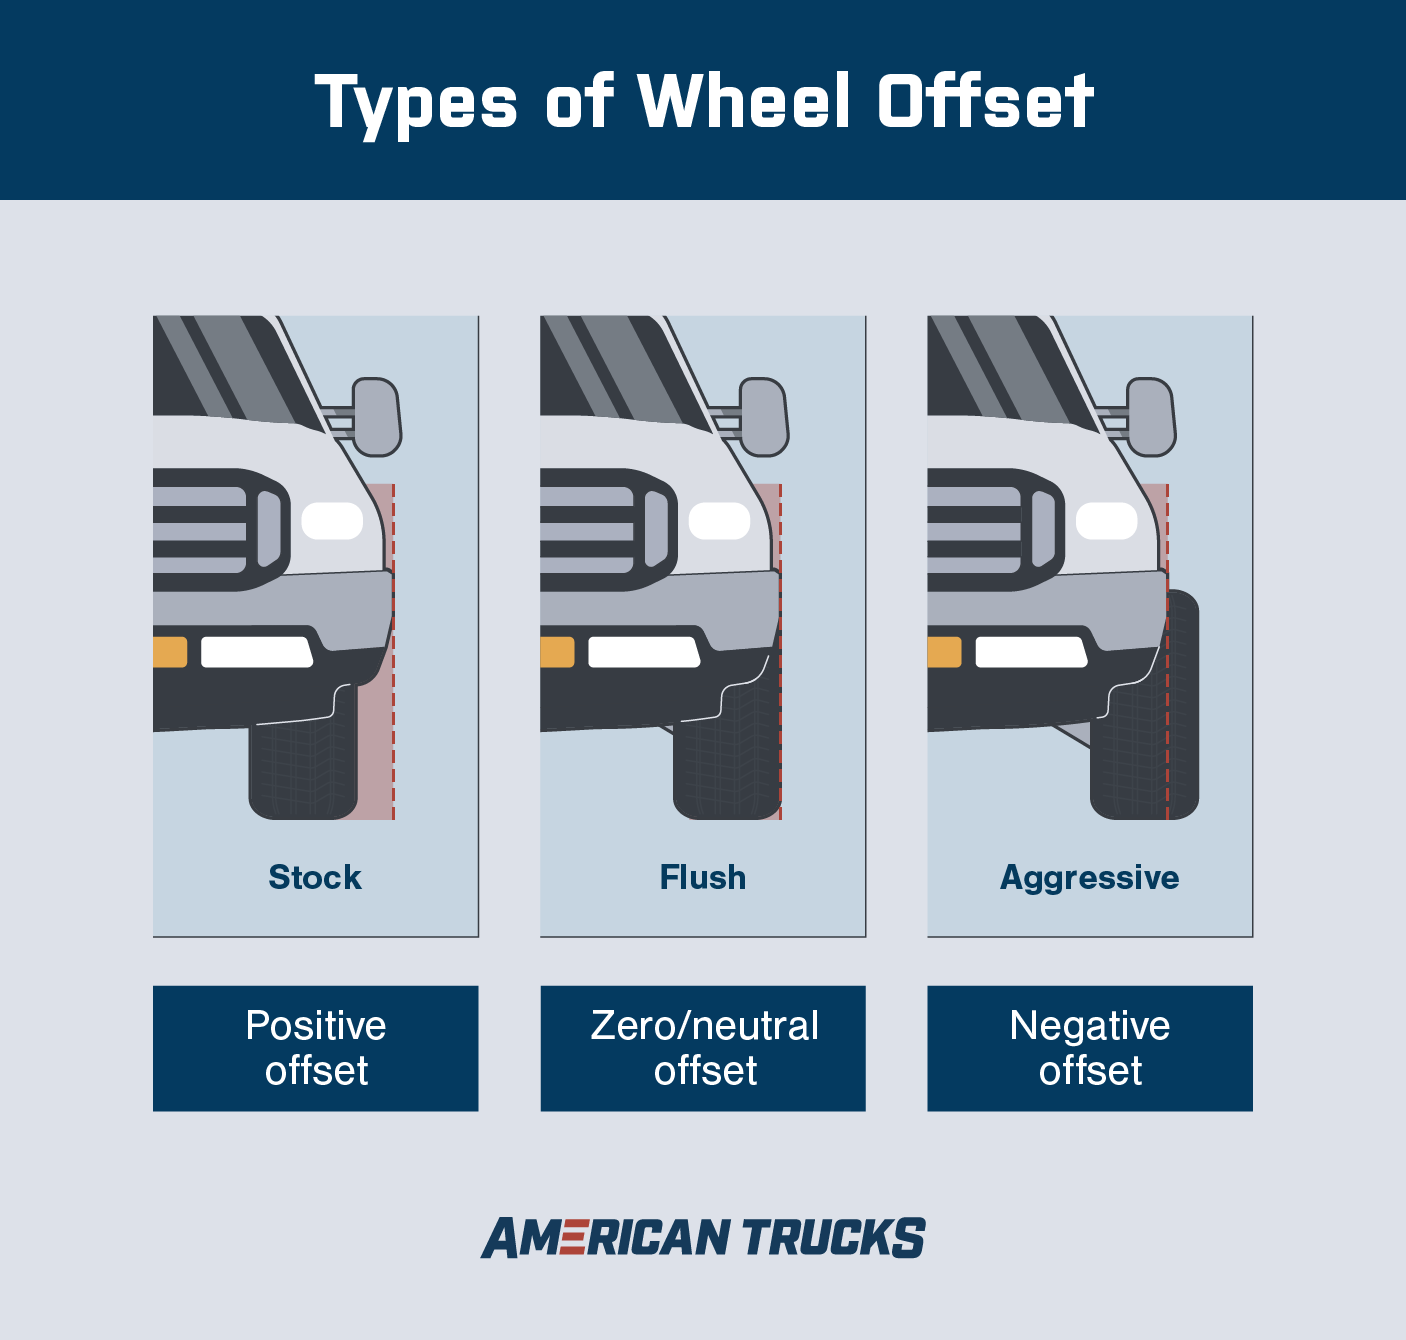 Graphic showing the three different types of wheel offsets, including positive, negative, and zero/netural.